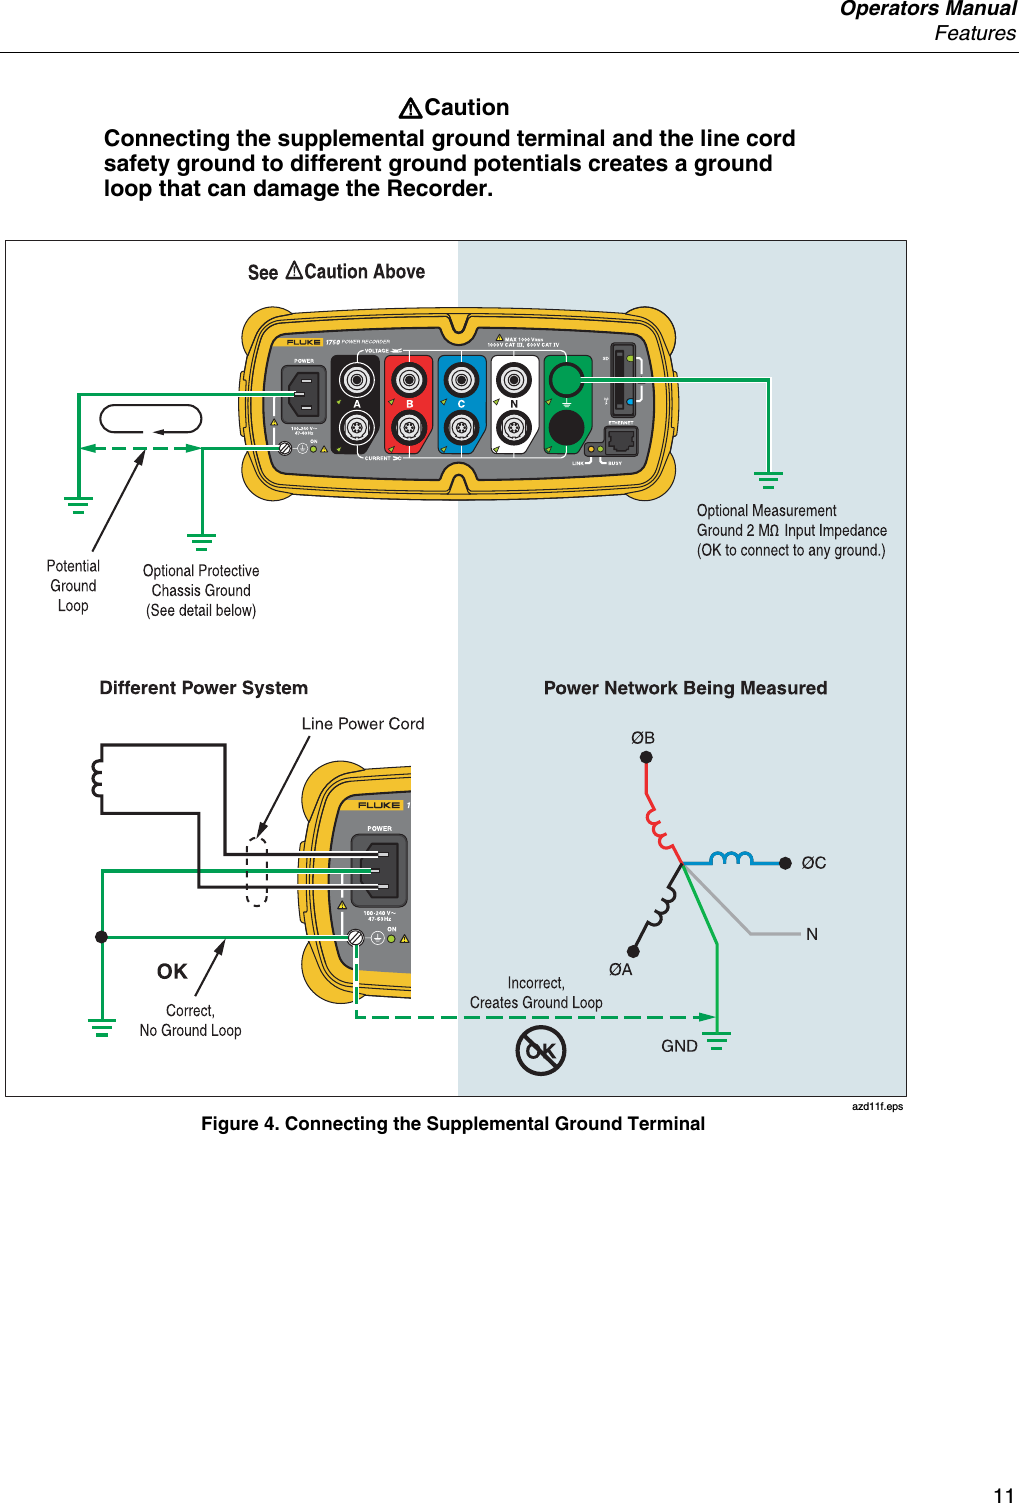  Operators Manual  Features     11 WCaution Connecting the supplemental ground terminal and the line cord safety ground to different ground potentials creates a ground loop that can damage the Recorder.  azd11f.eps Figure 4. Connecting the Supplemental Ground Terminal 